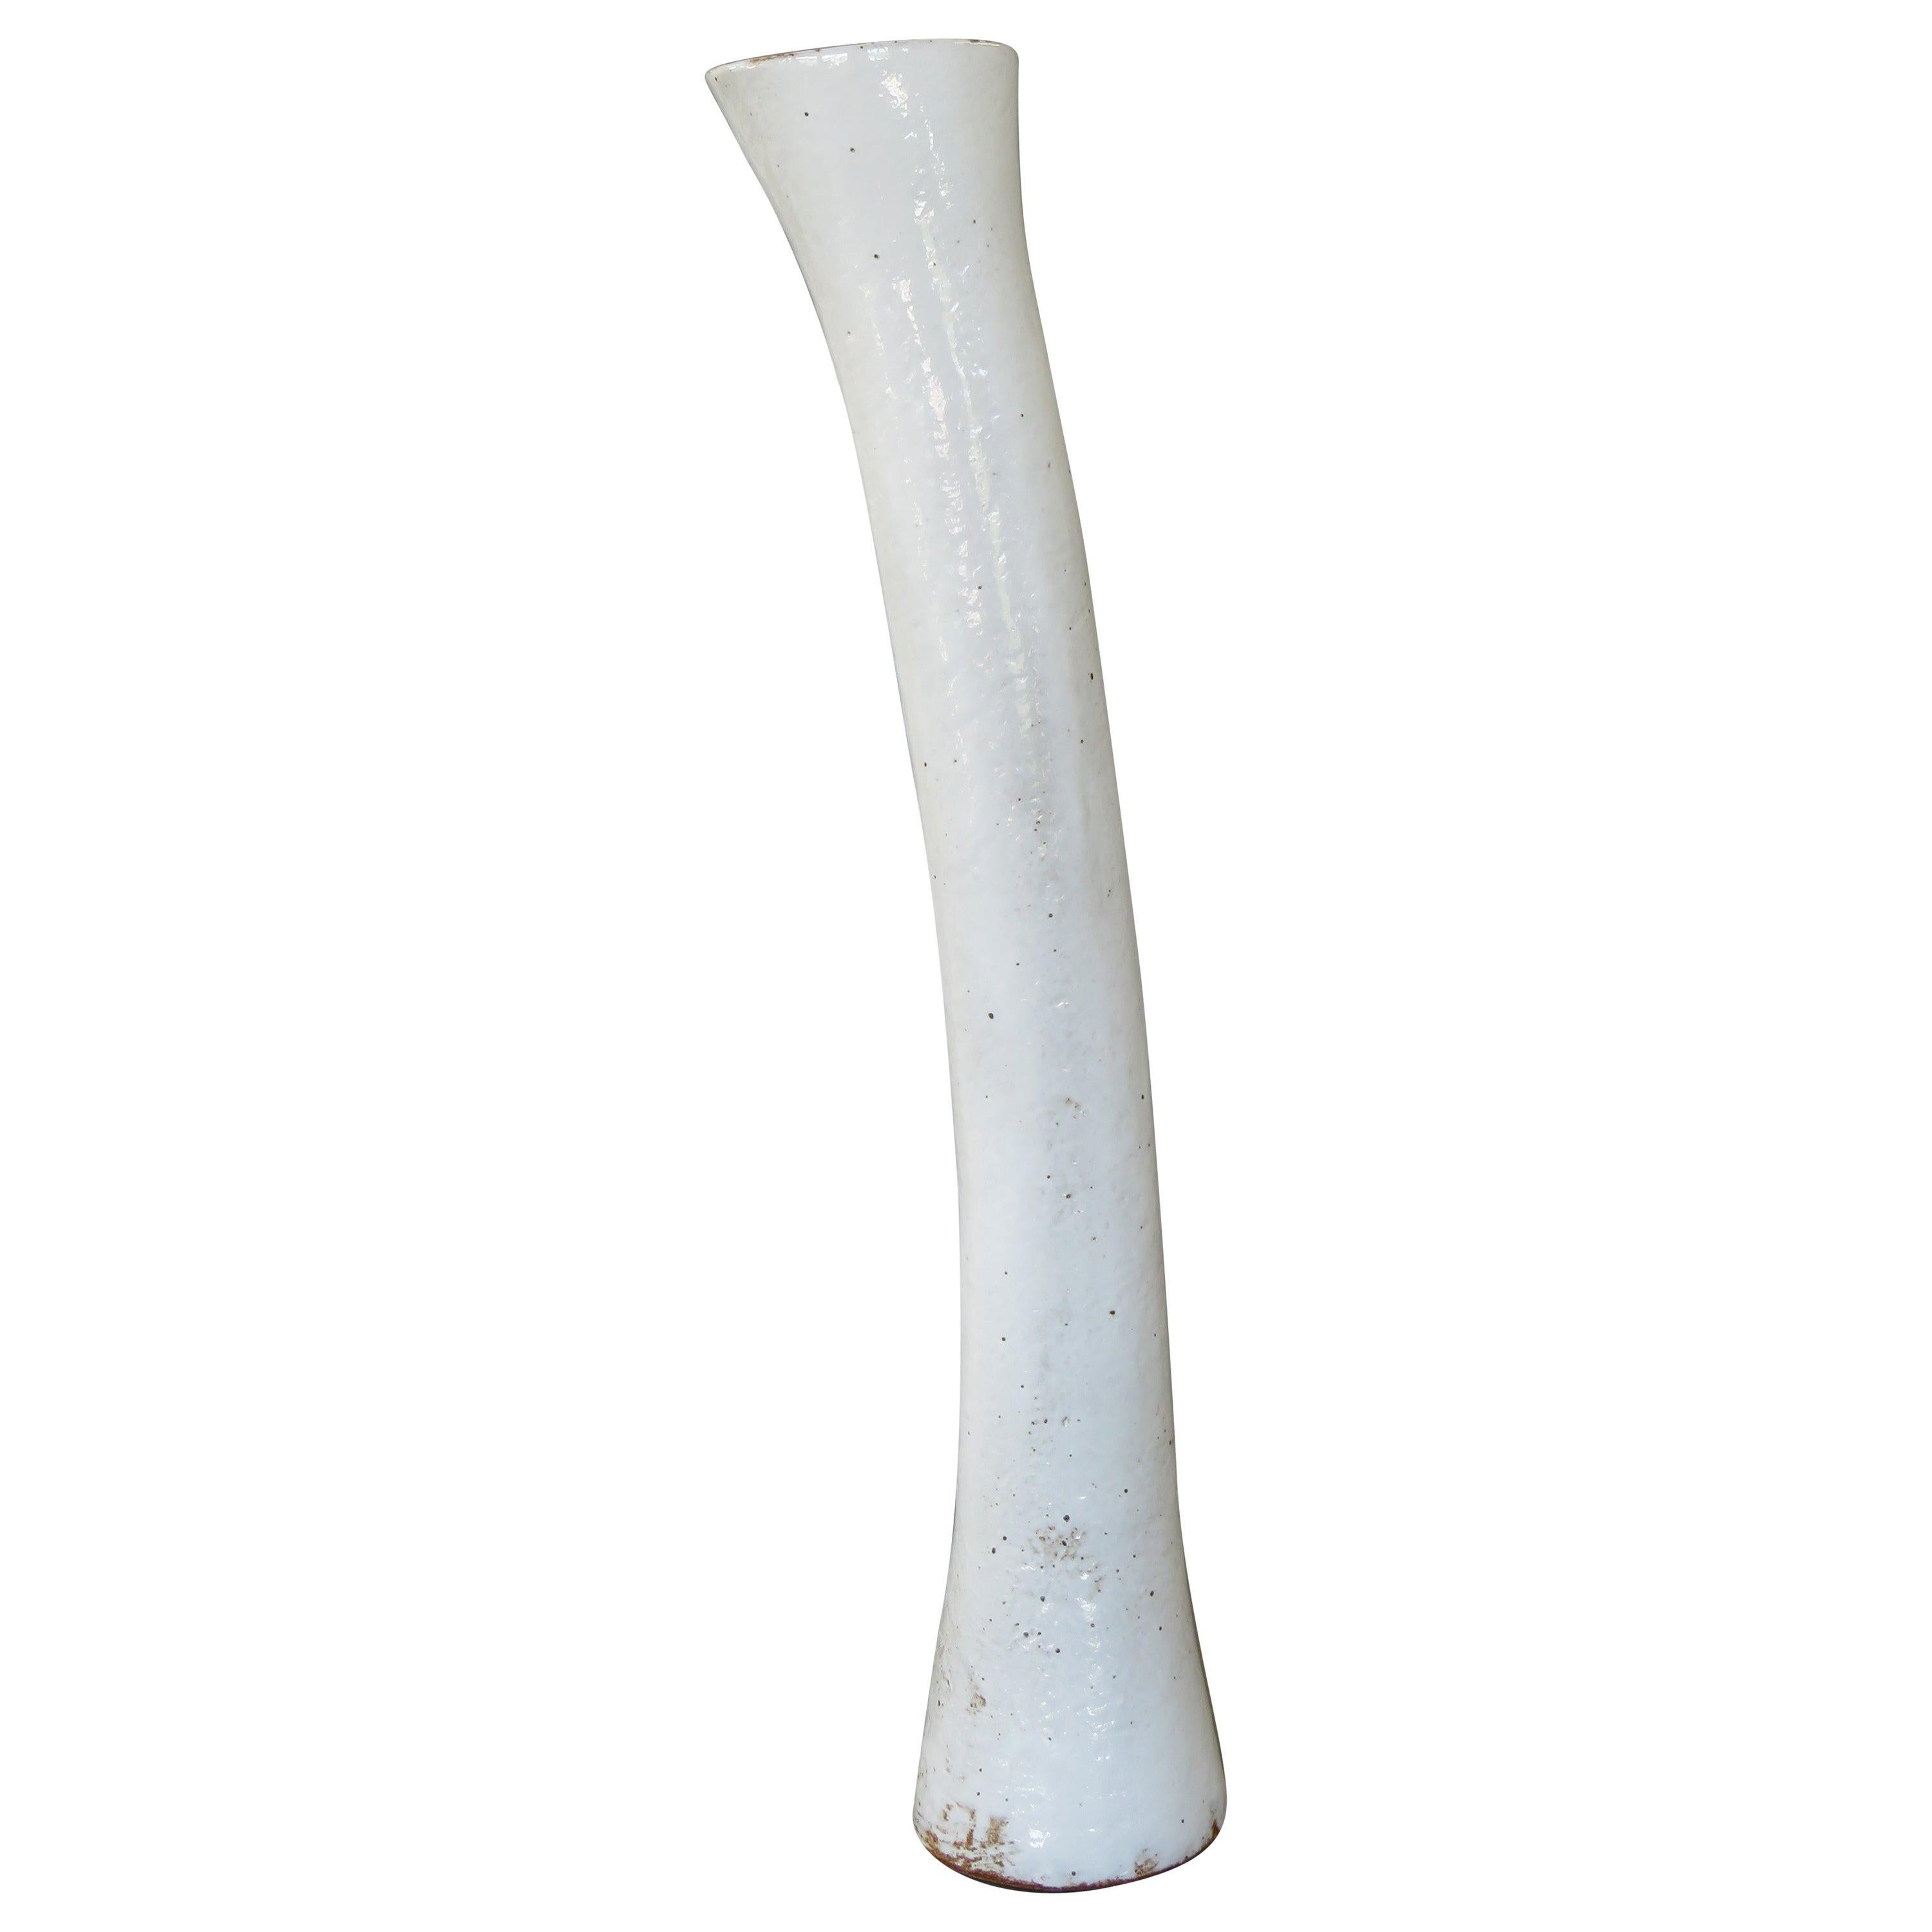 Tall Arcing Ceramic Vase, White Glaze with Brown Edge, Hand Built